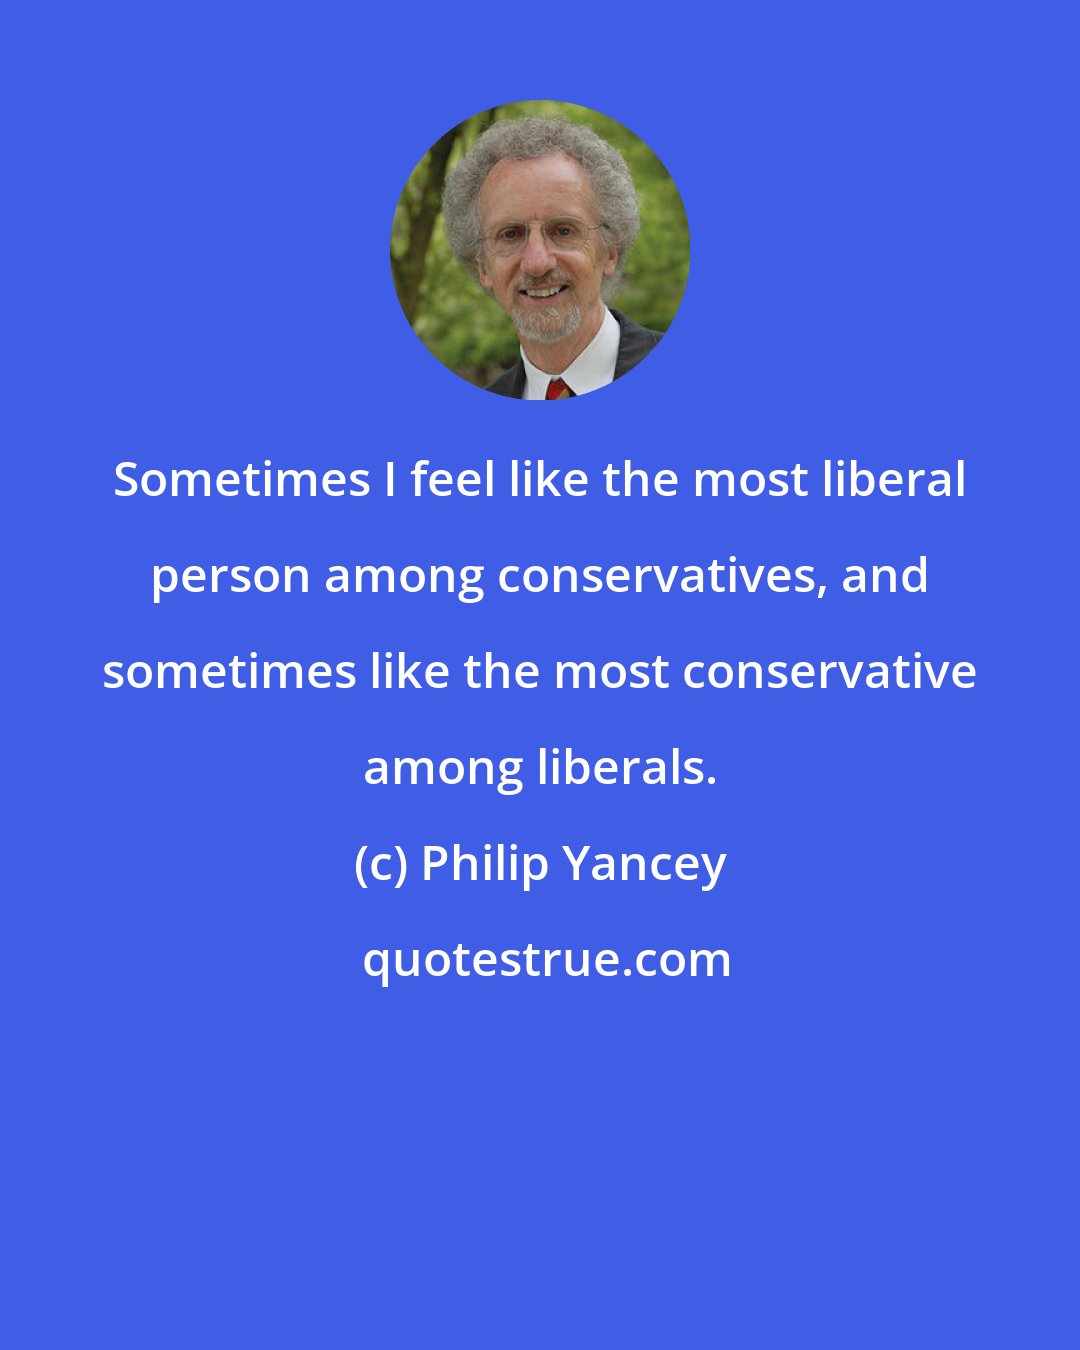 Philip Yancey: Sometimes I feel like the most liberal person among conservatives, and sometimes like the most conservative among liberals.